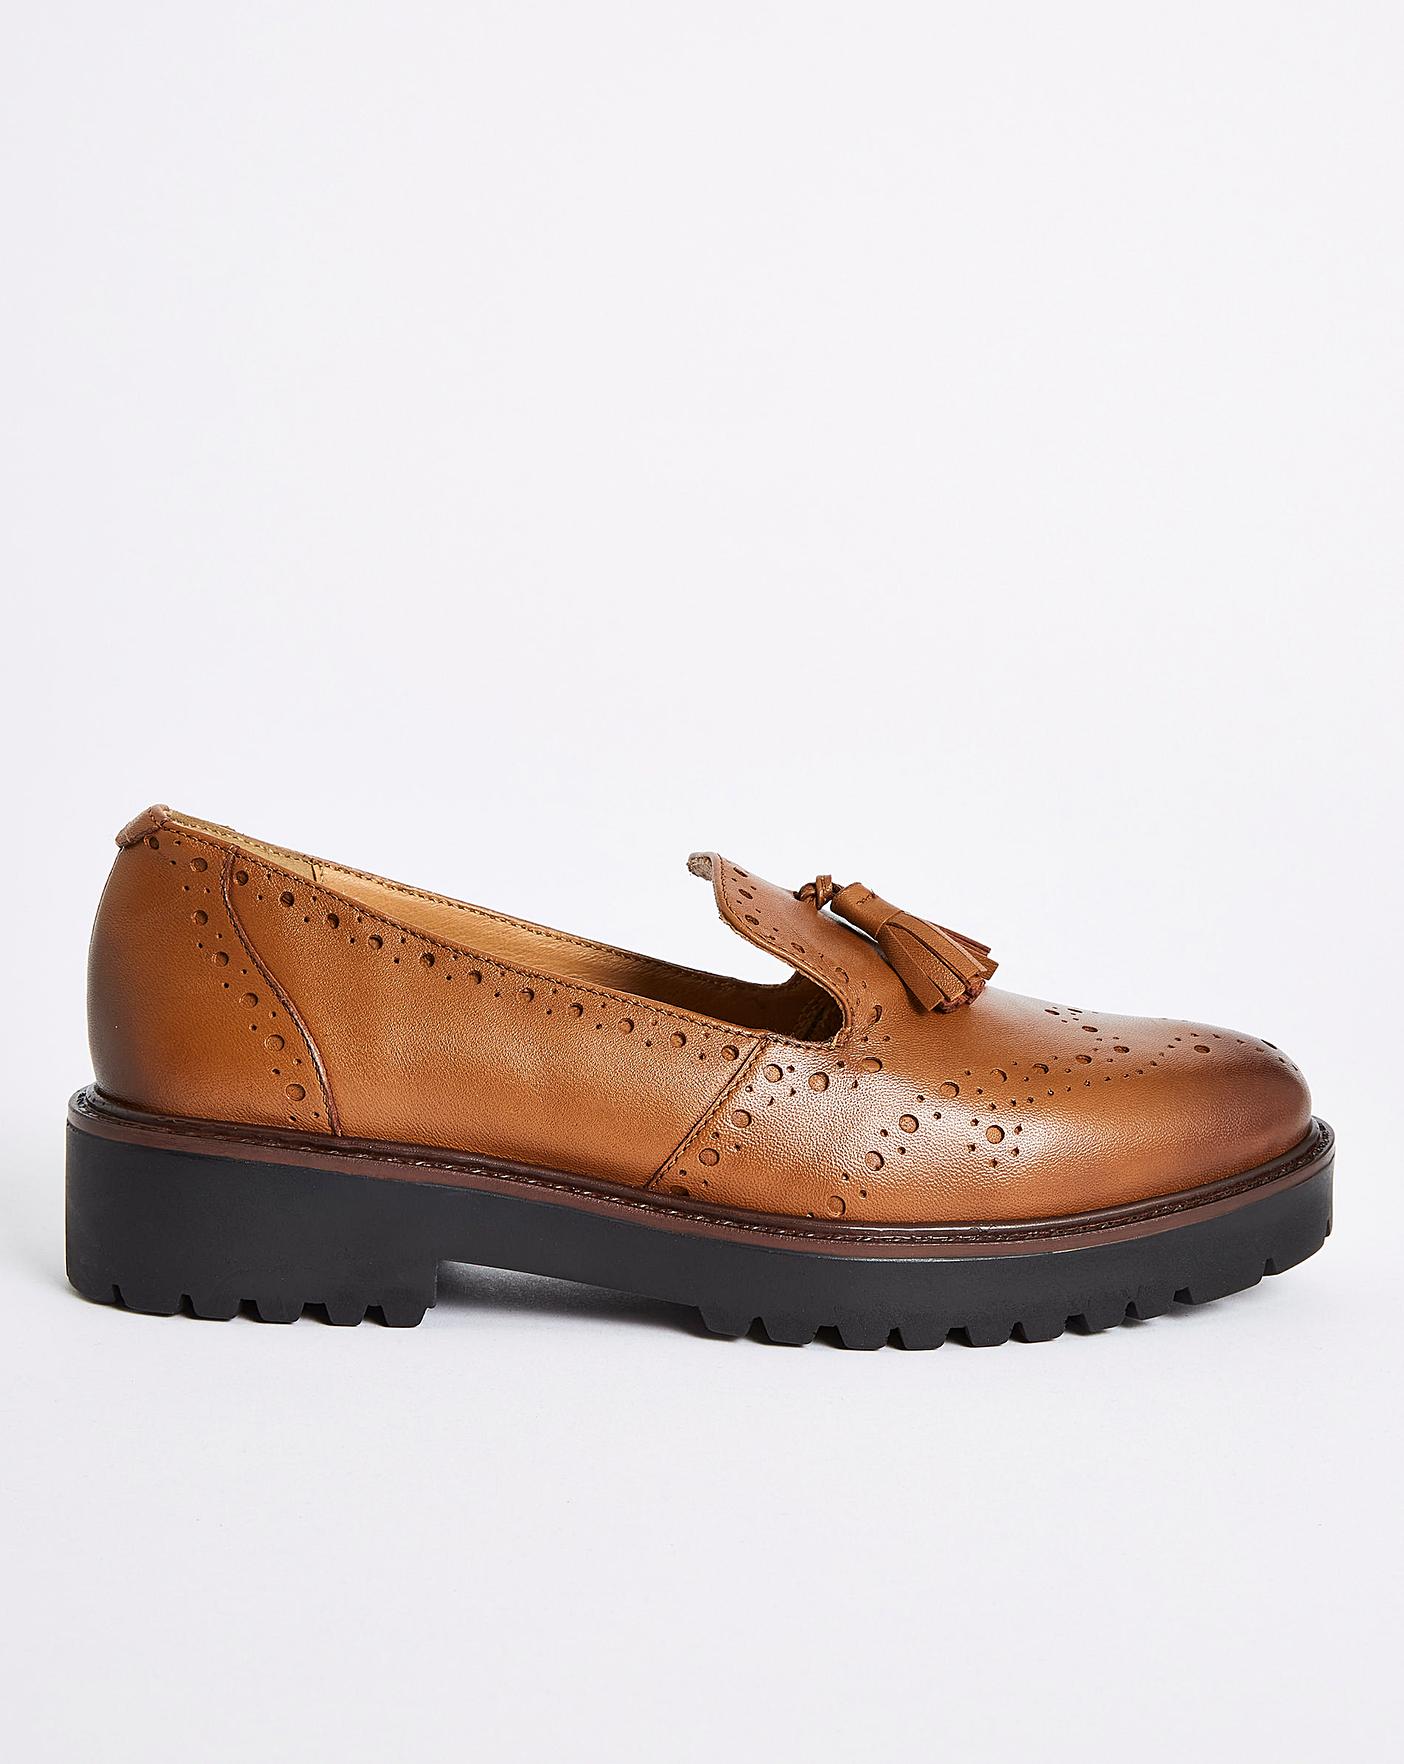 Leather Loafers Wide Fit | J D Williams